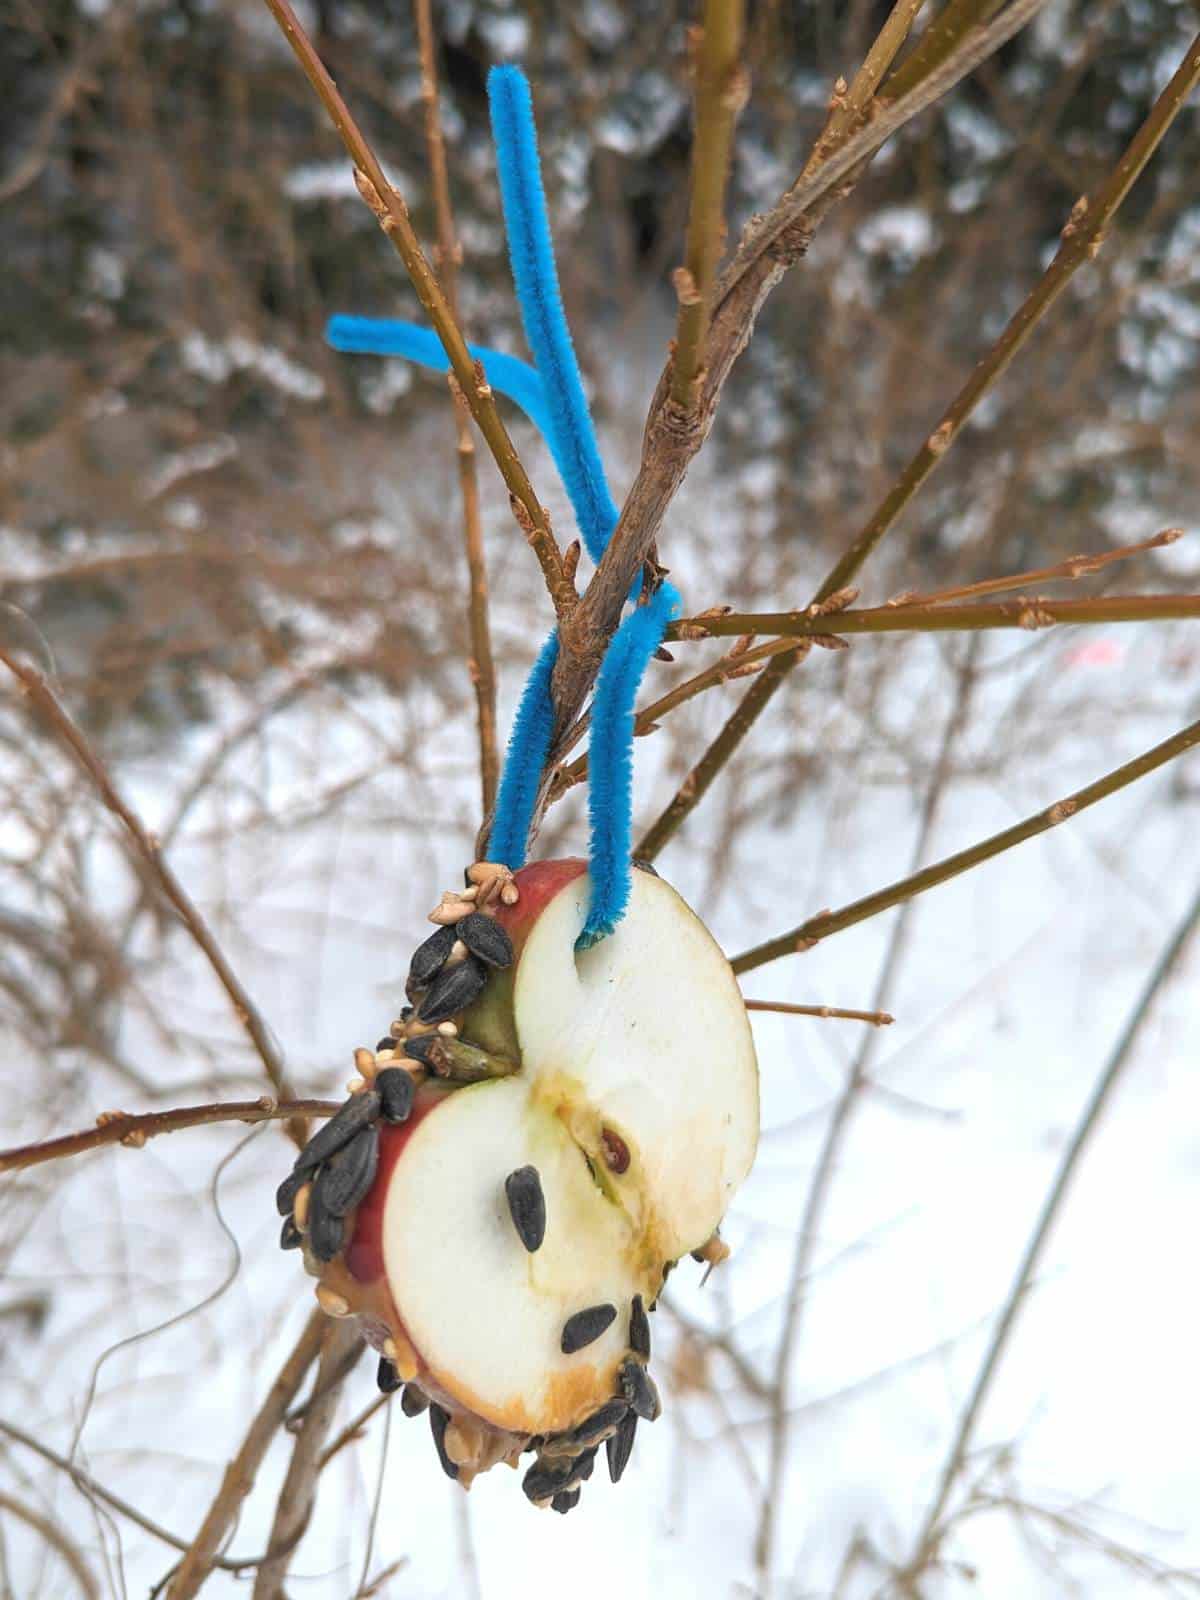 Apple slice hanging from a shrub with bare branches by a bright blue pipe cleaner with bird seeds stuck on the side and a few on the front. Snowy landscape in the background.